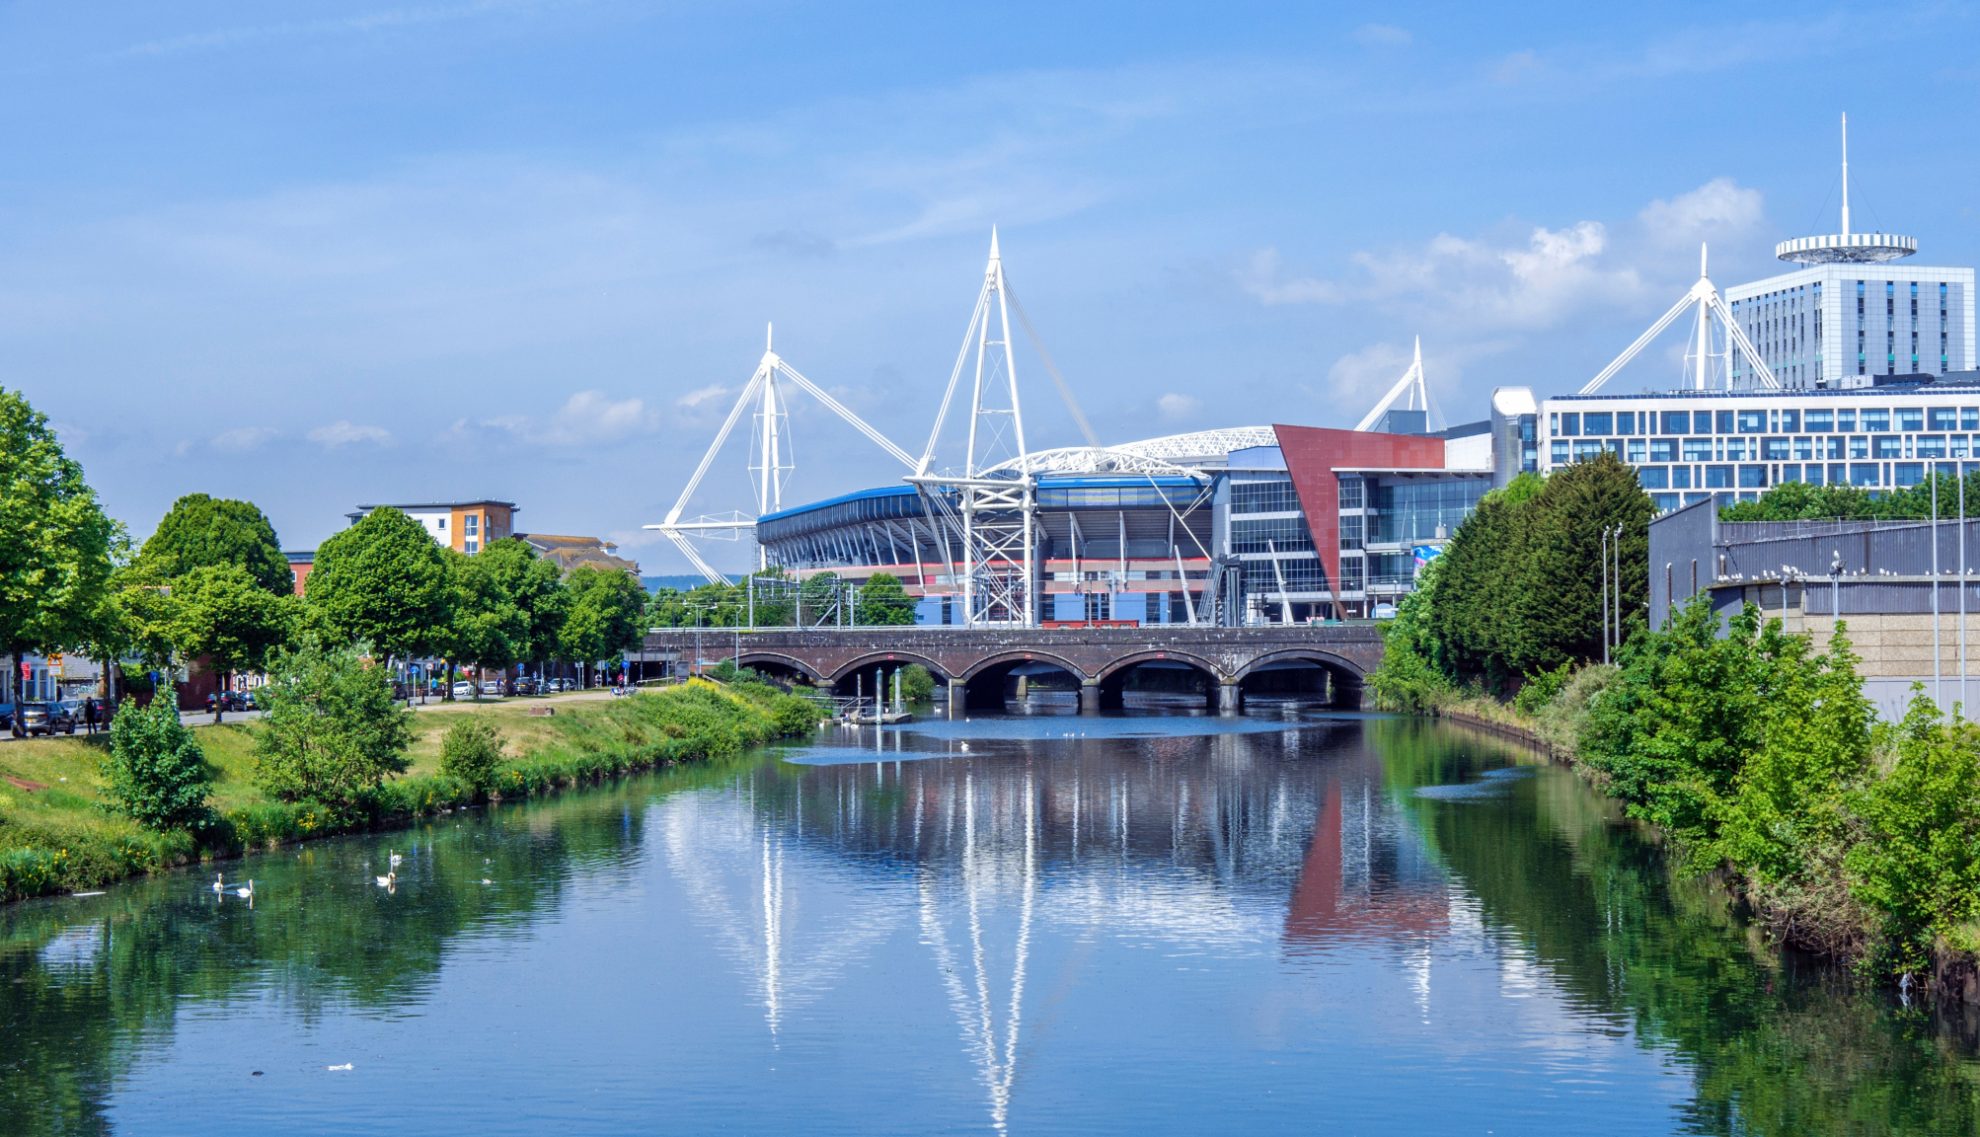 The River Taff in Cardiff, Wales